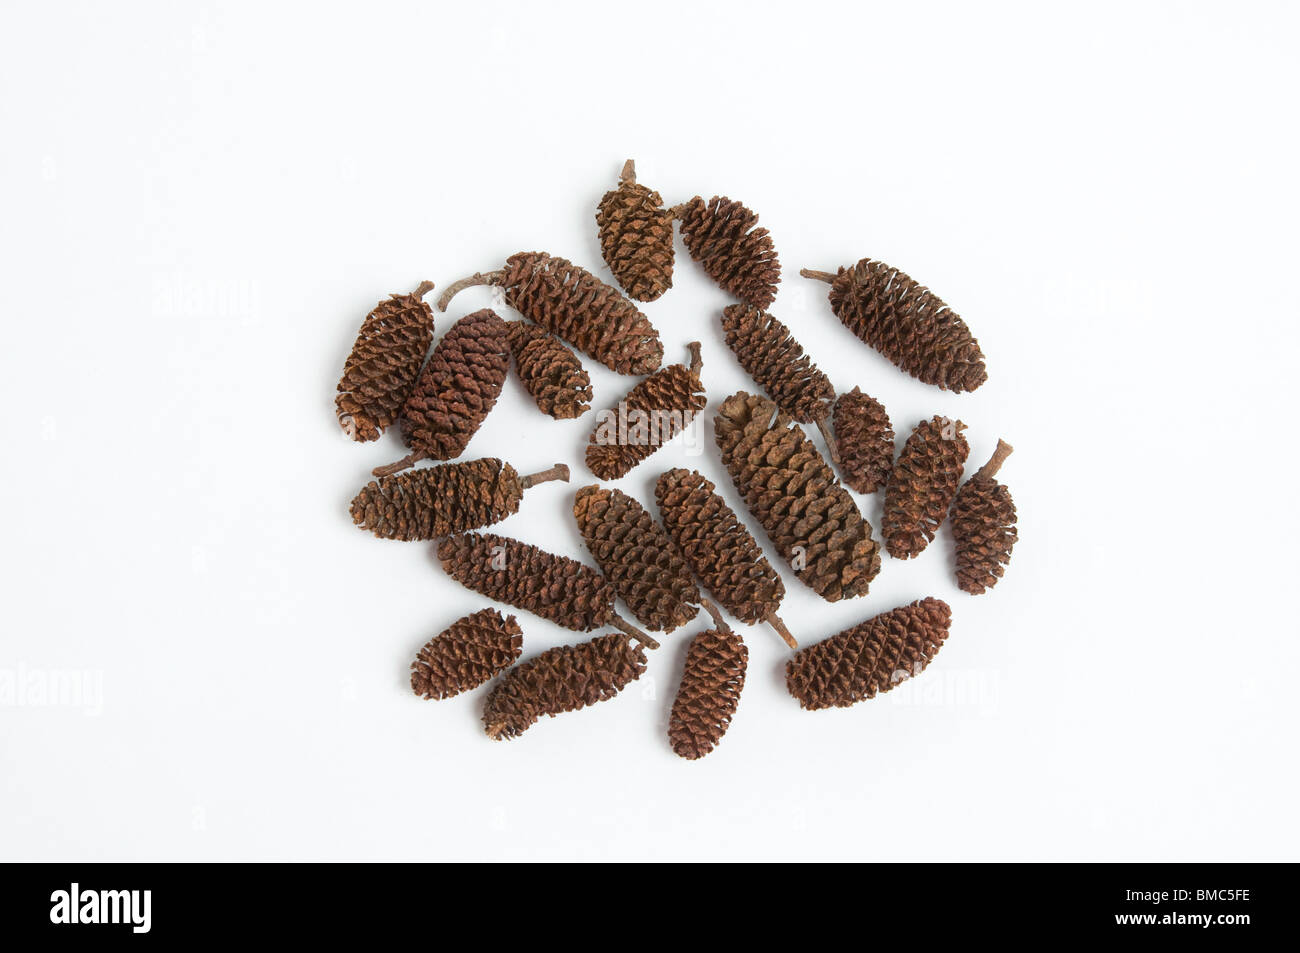 Dried, natural alder cones on a white background Stock Photo